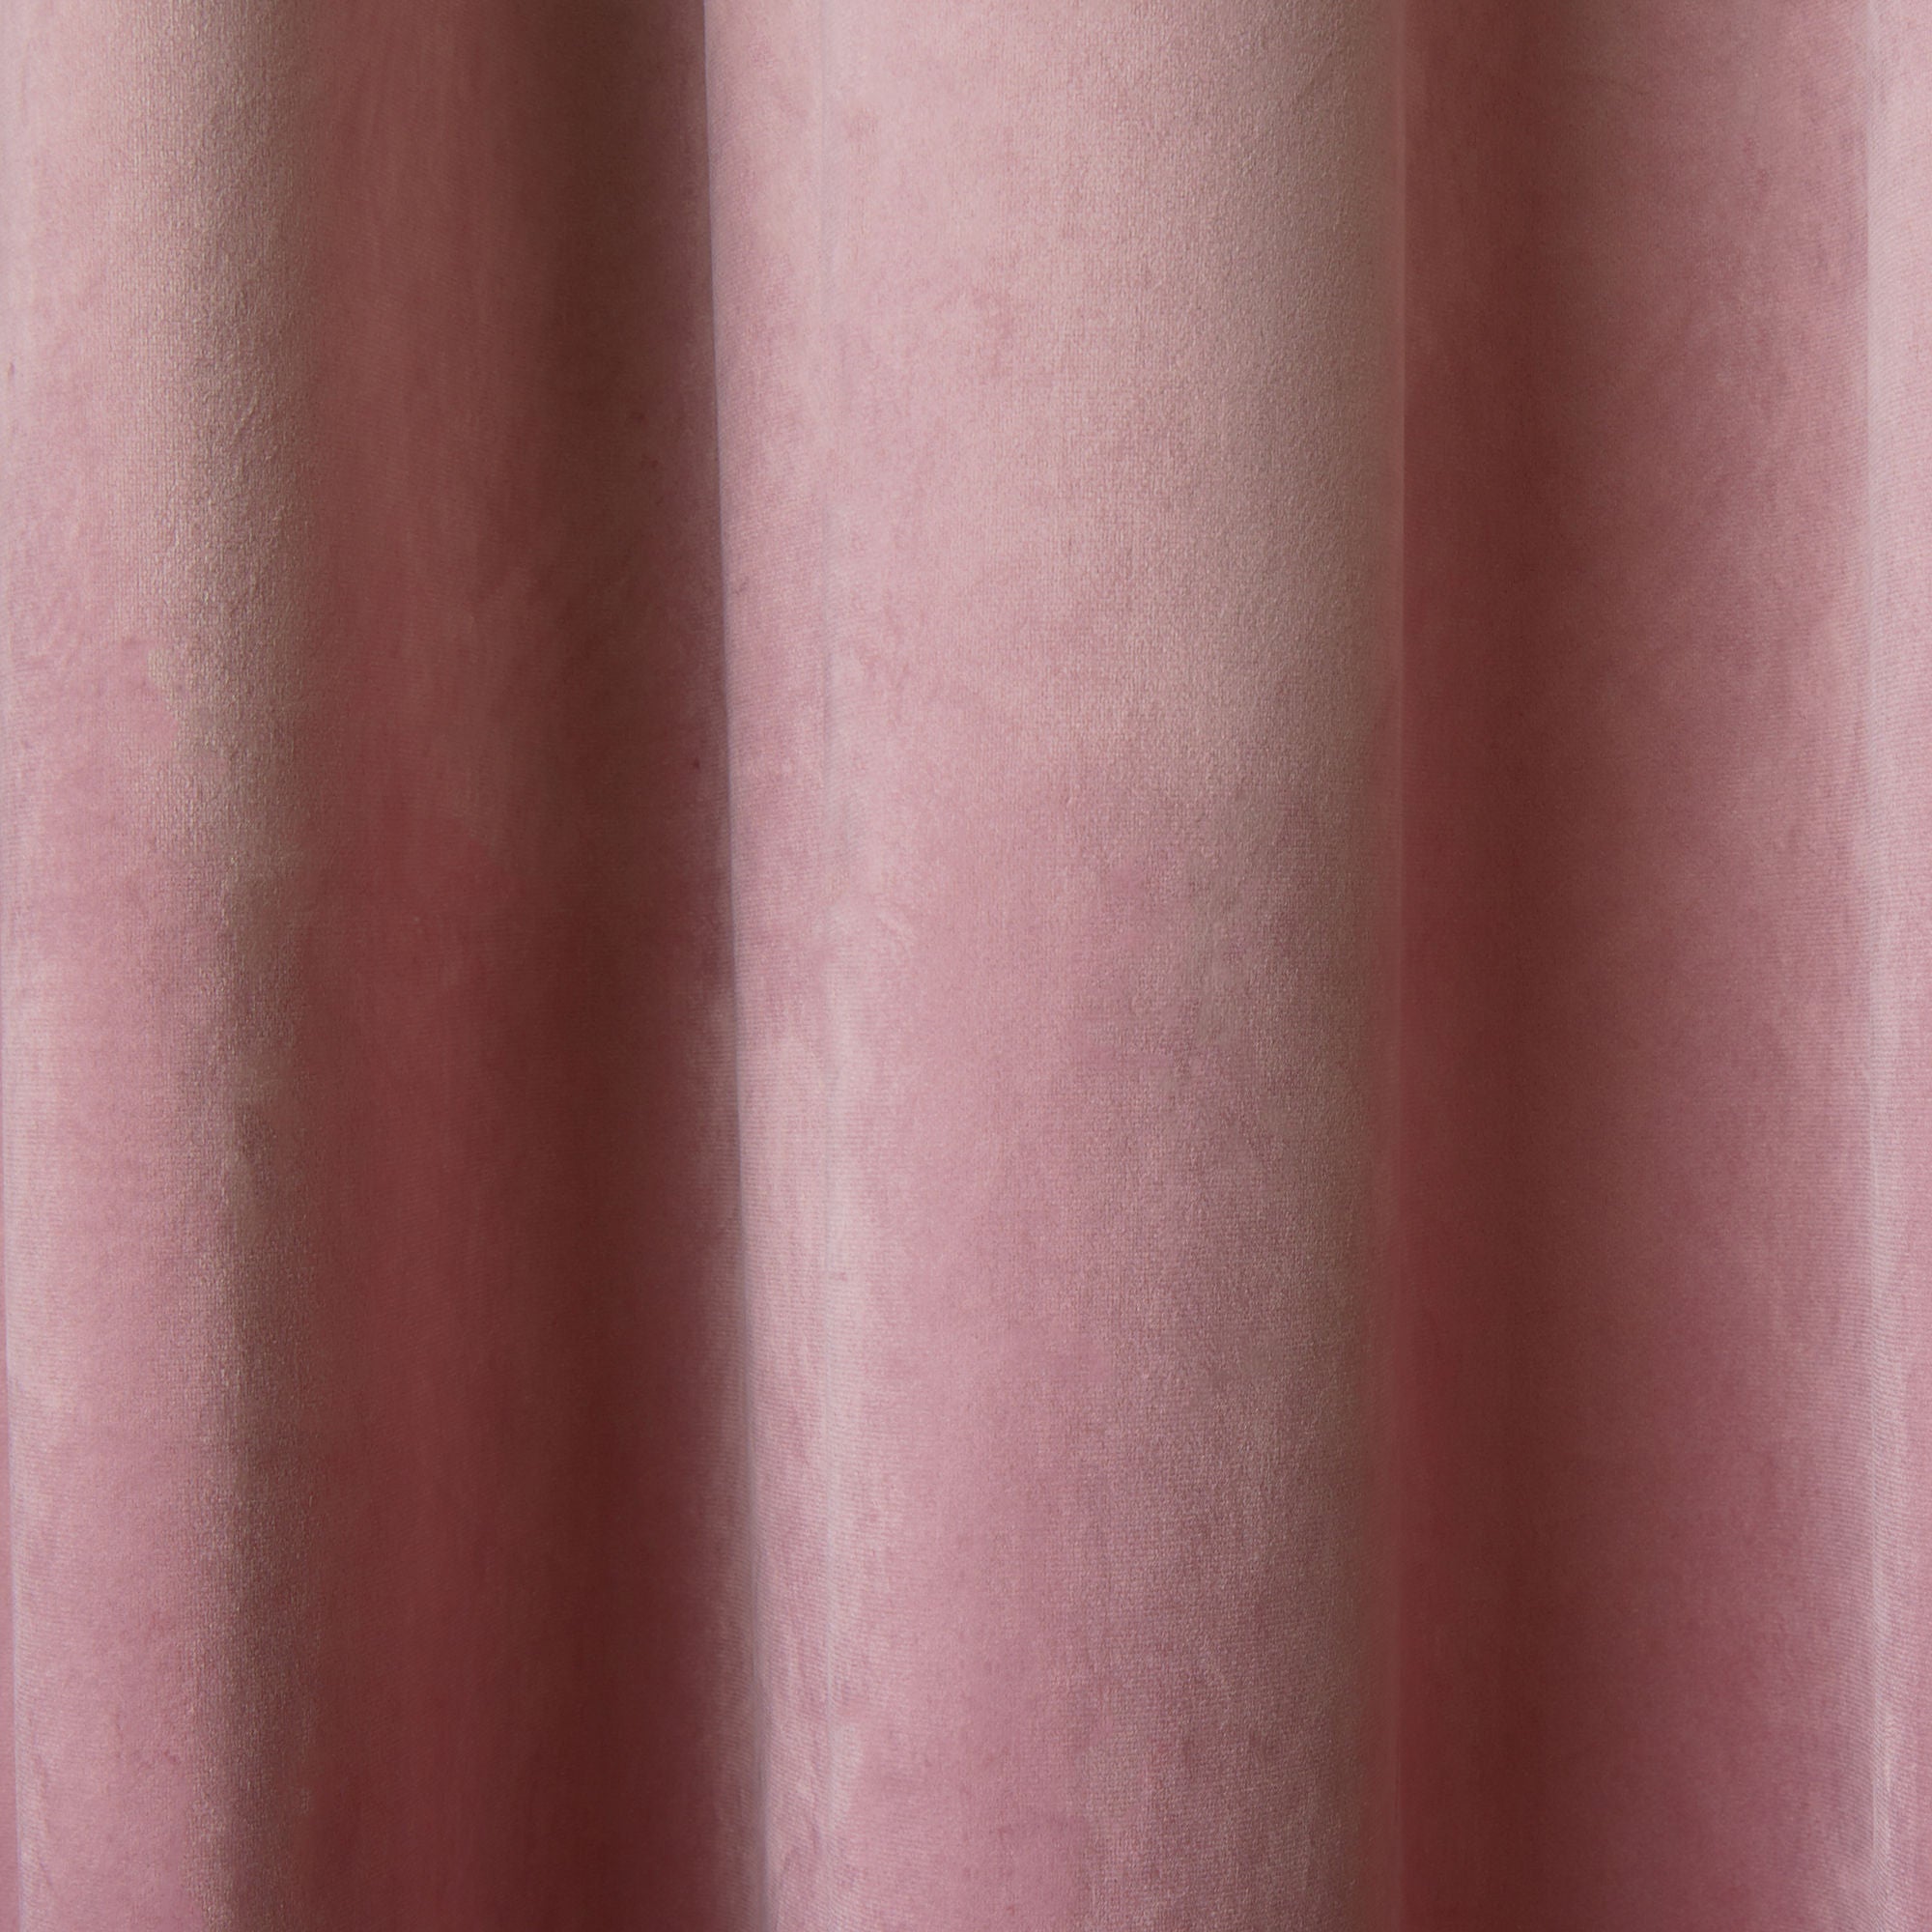 Montrose Pair of Eyelet Curtains by Laurence Llewelyn-Bowen in Blush - Pair of Eyelet Curtains - Laurence Llewelyn-Bowen